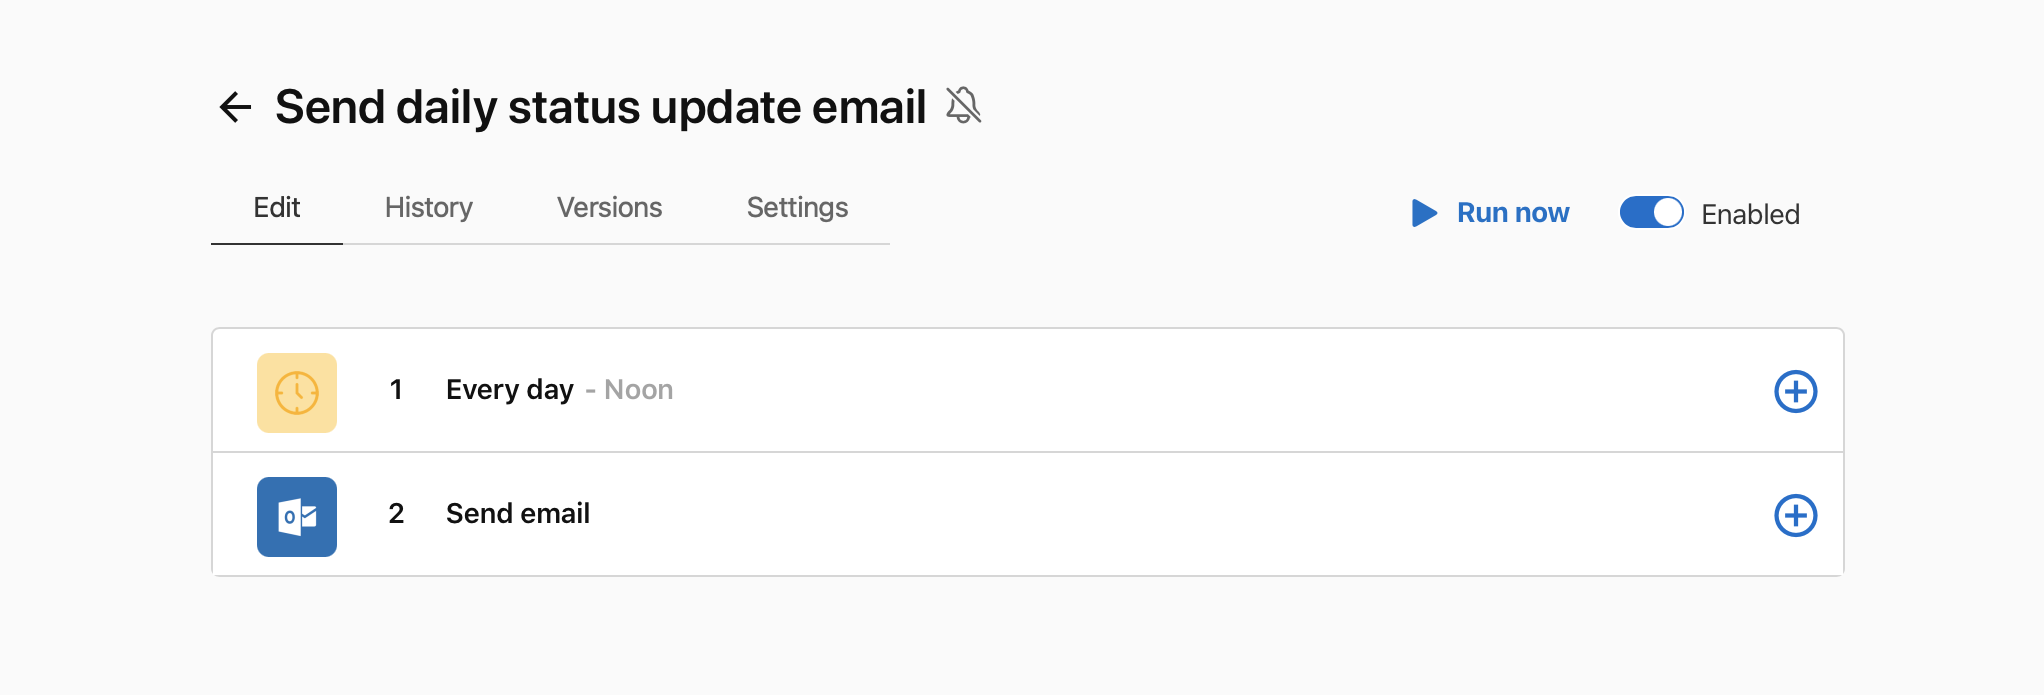 Run now example. Flow triggered by Schedules utility that sends an email from Outlook